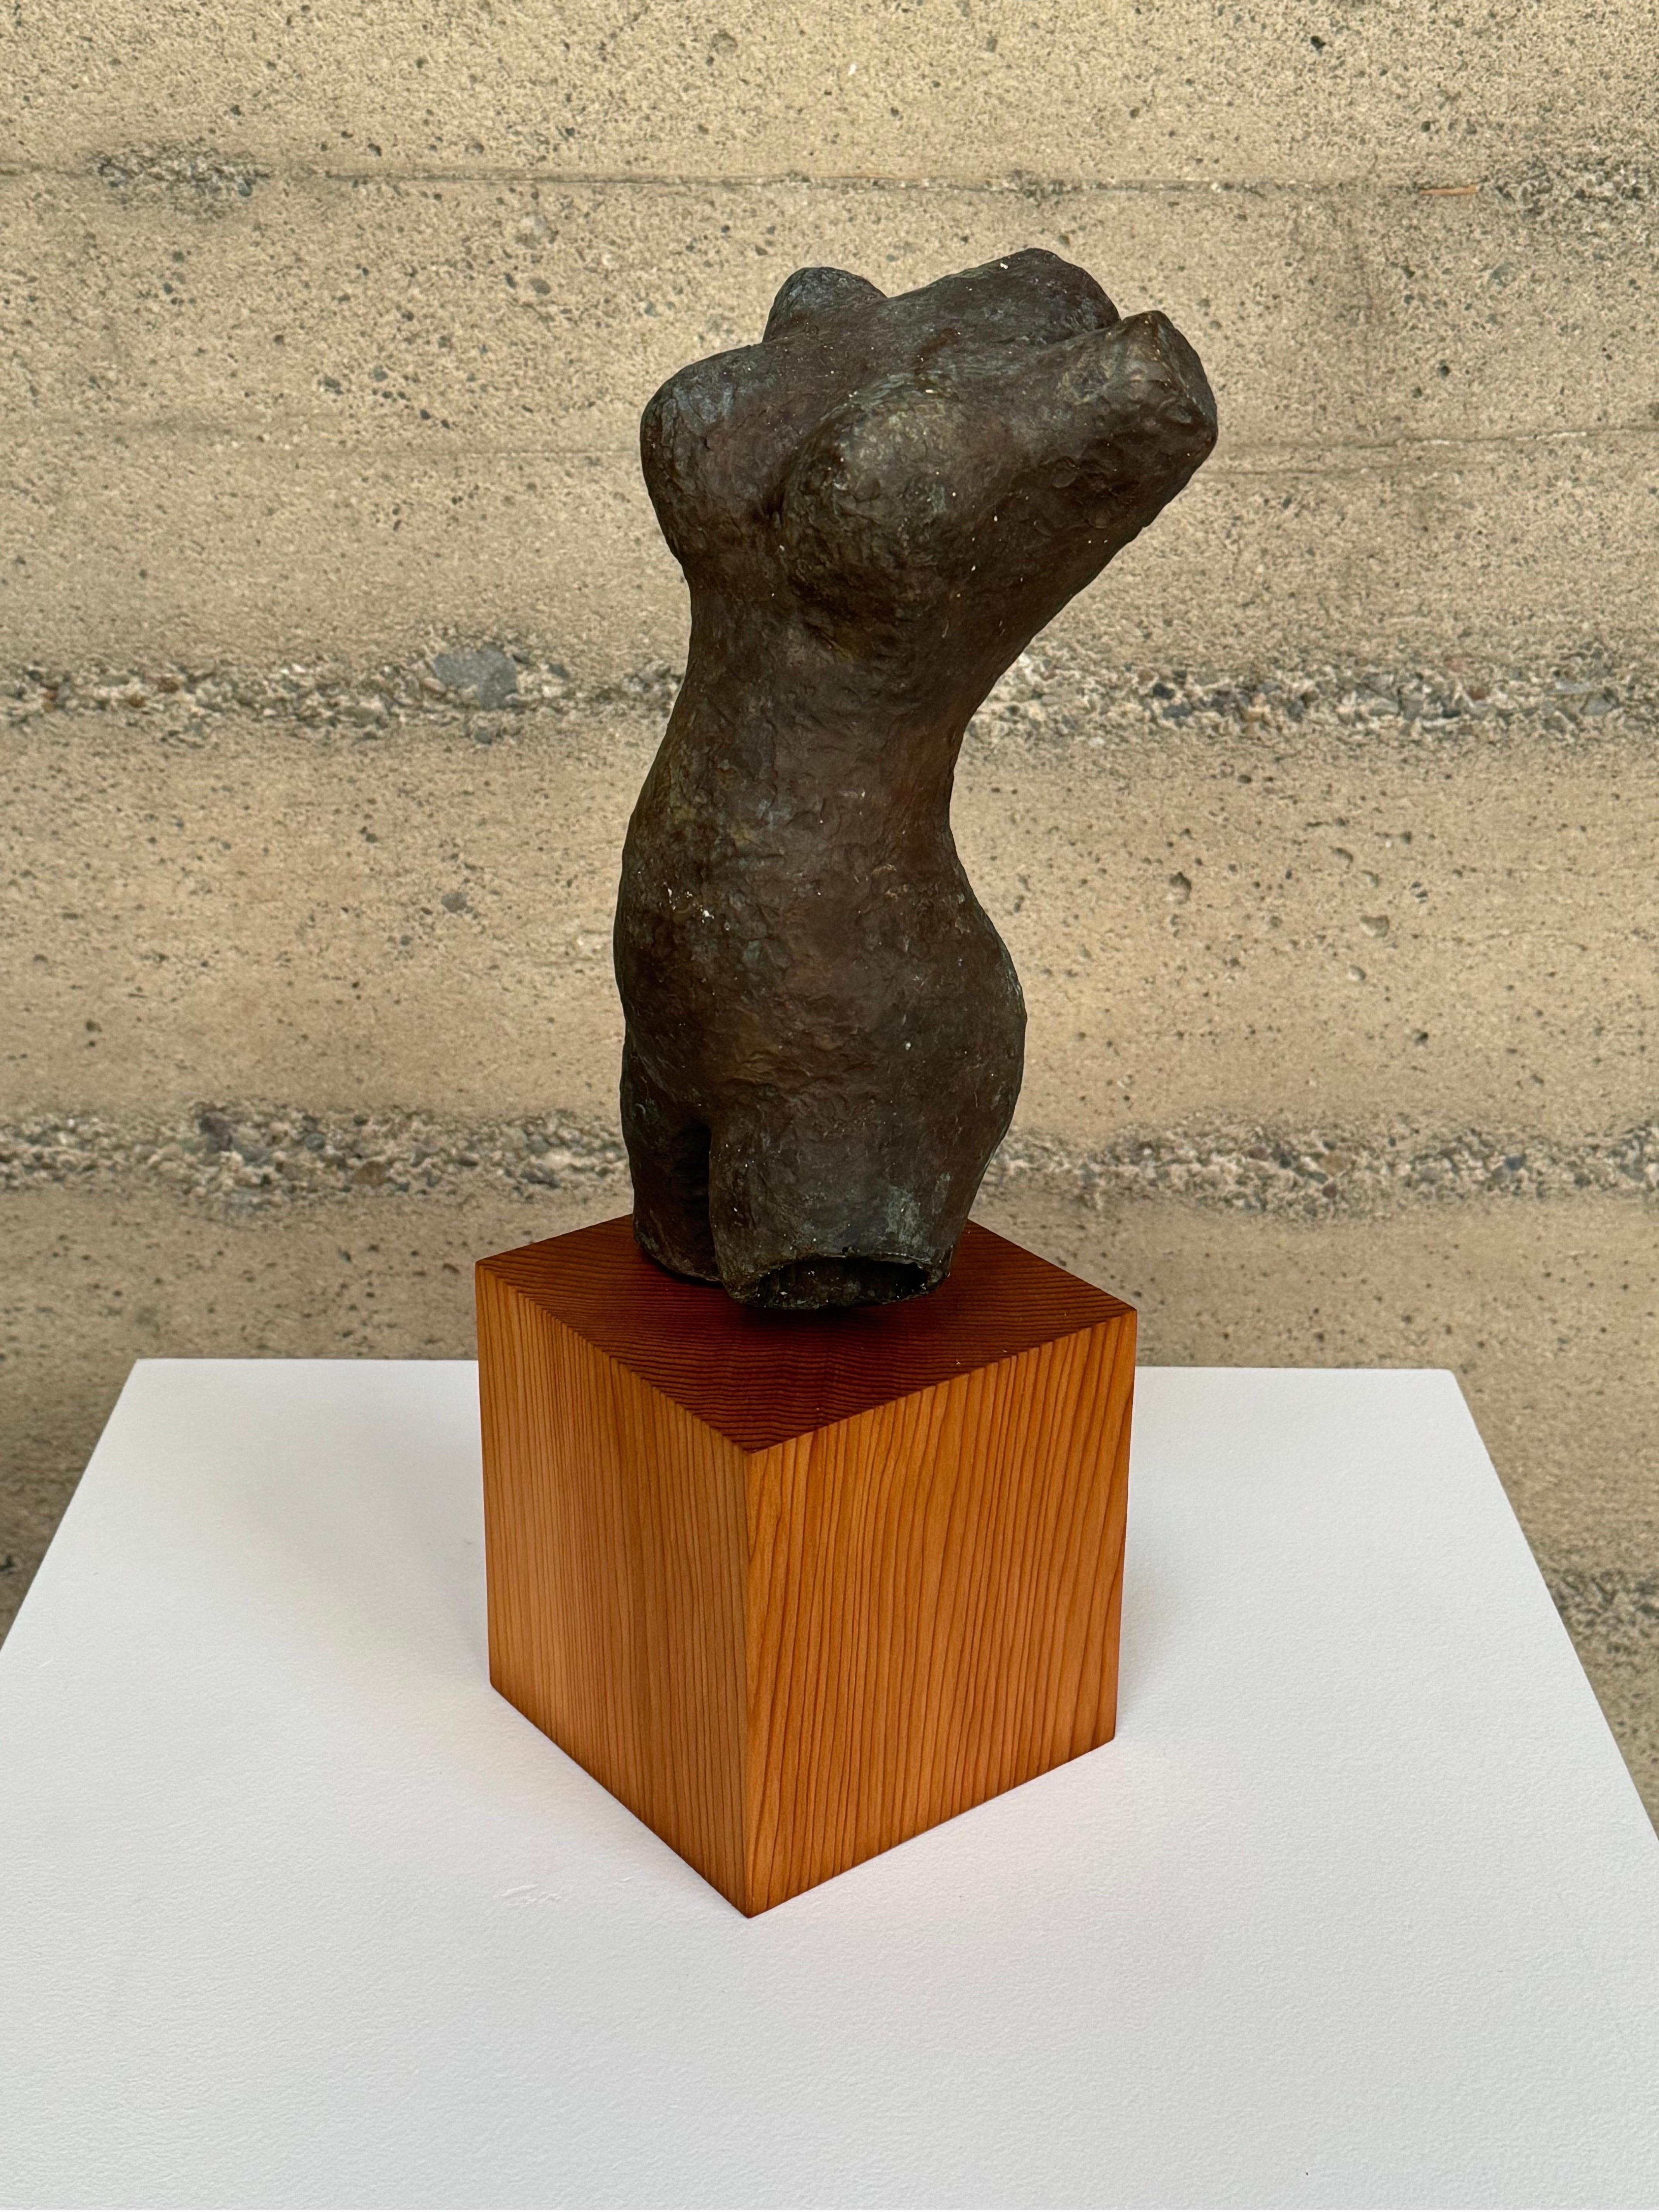 Hand-Crafted Abstract Figurative Bronze Sculpture Circa 1970s For Sale